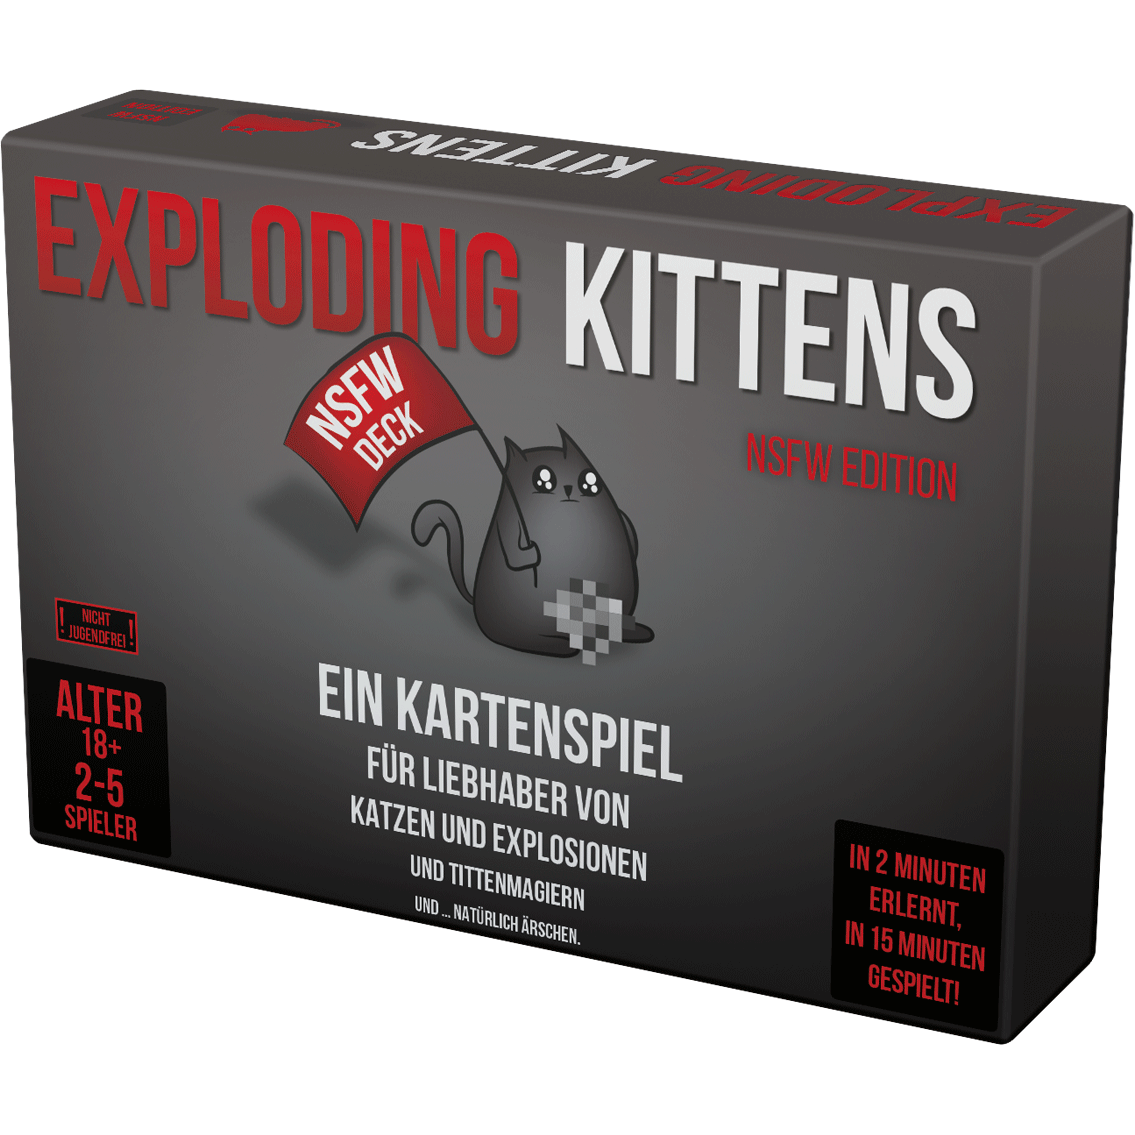 Exploding Kittens NSFW Edition - AB 18